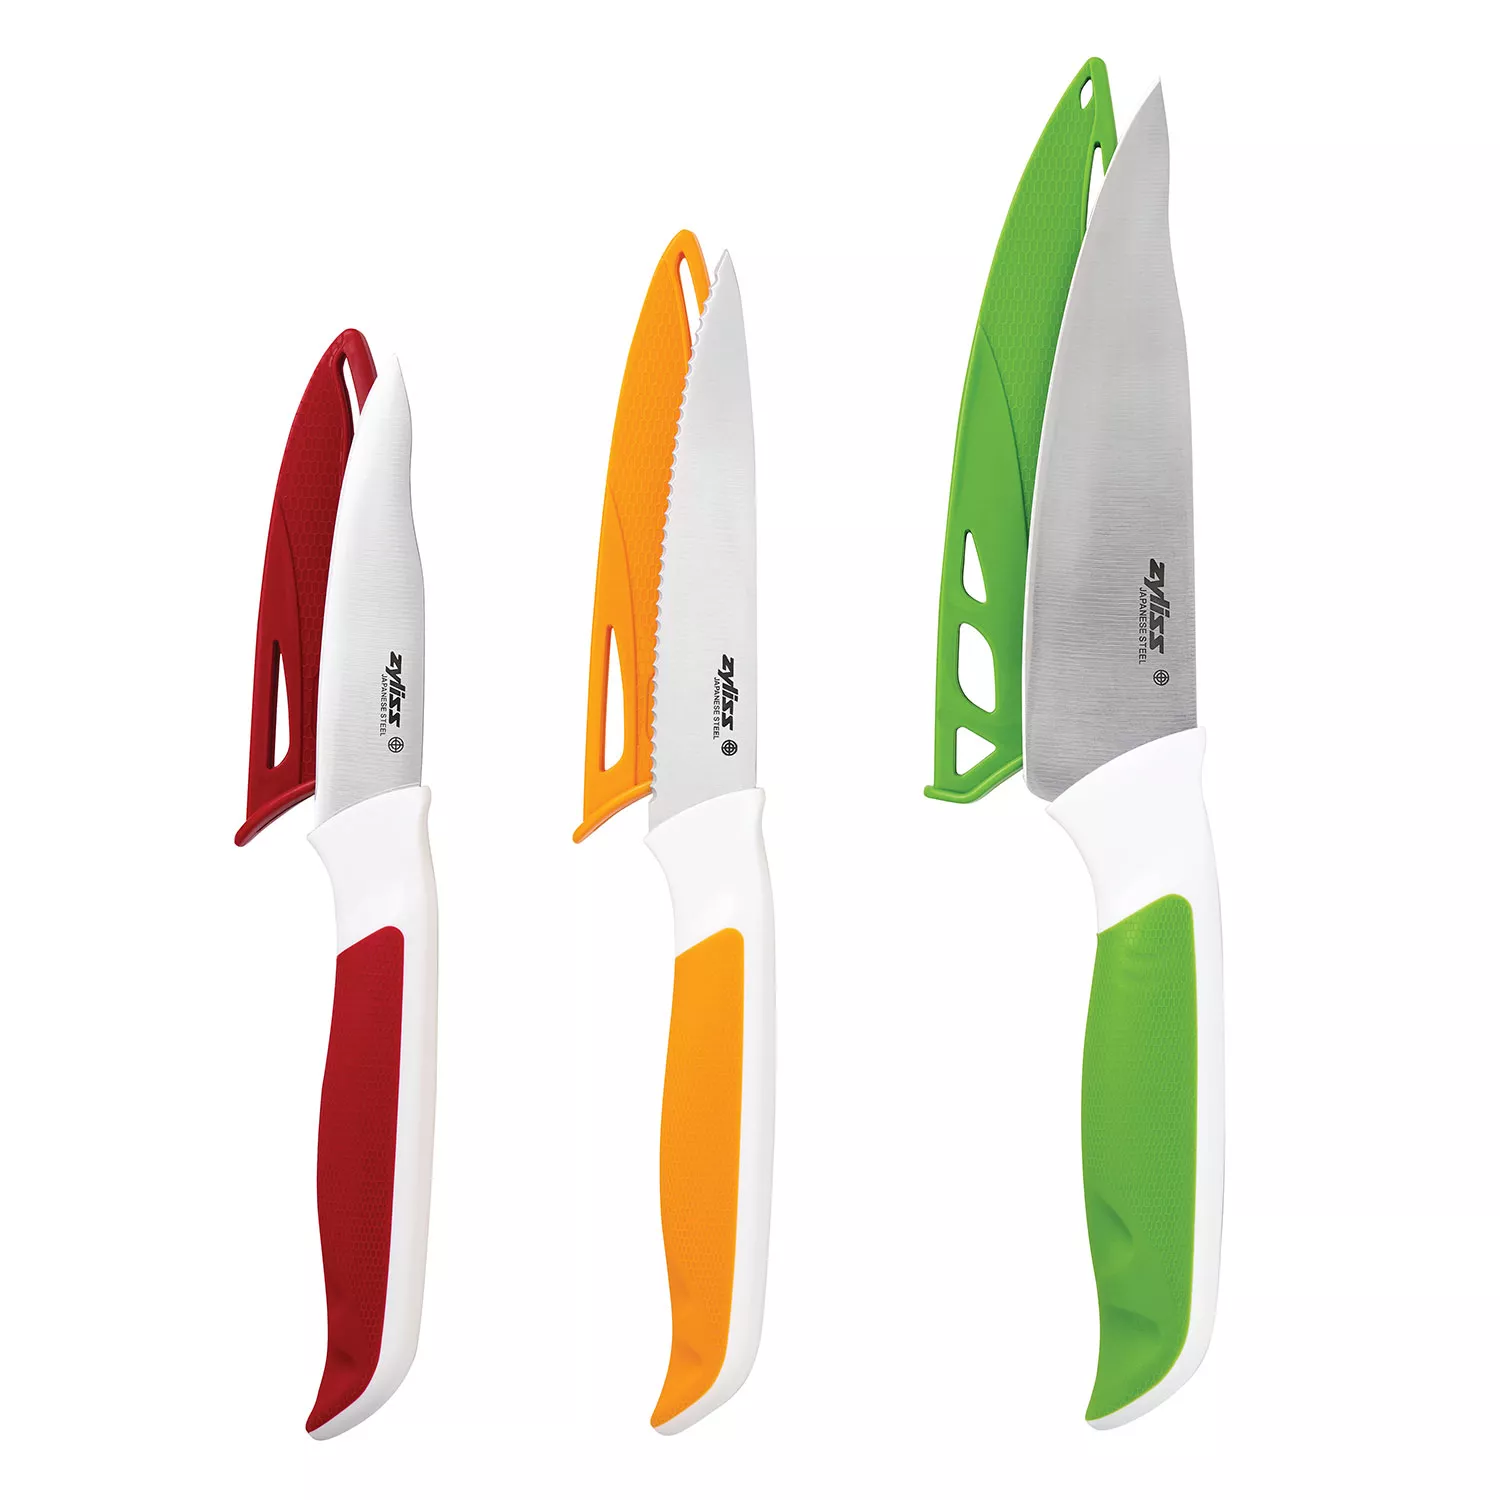 Zyliss Comfort Cutting Board and 3-PC Knife Set